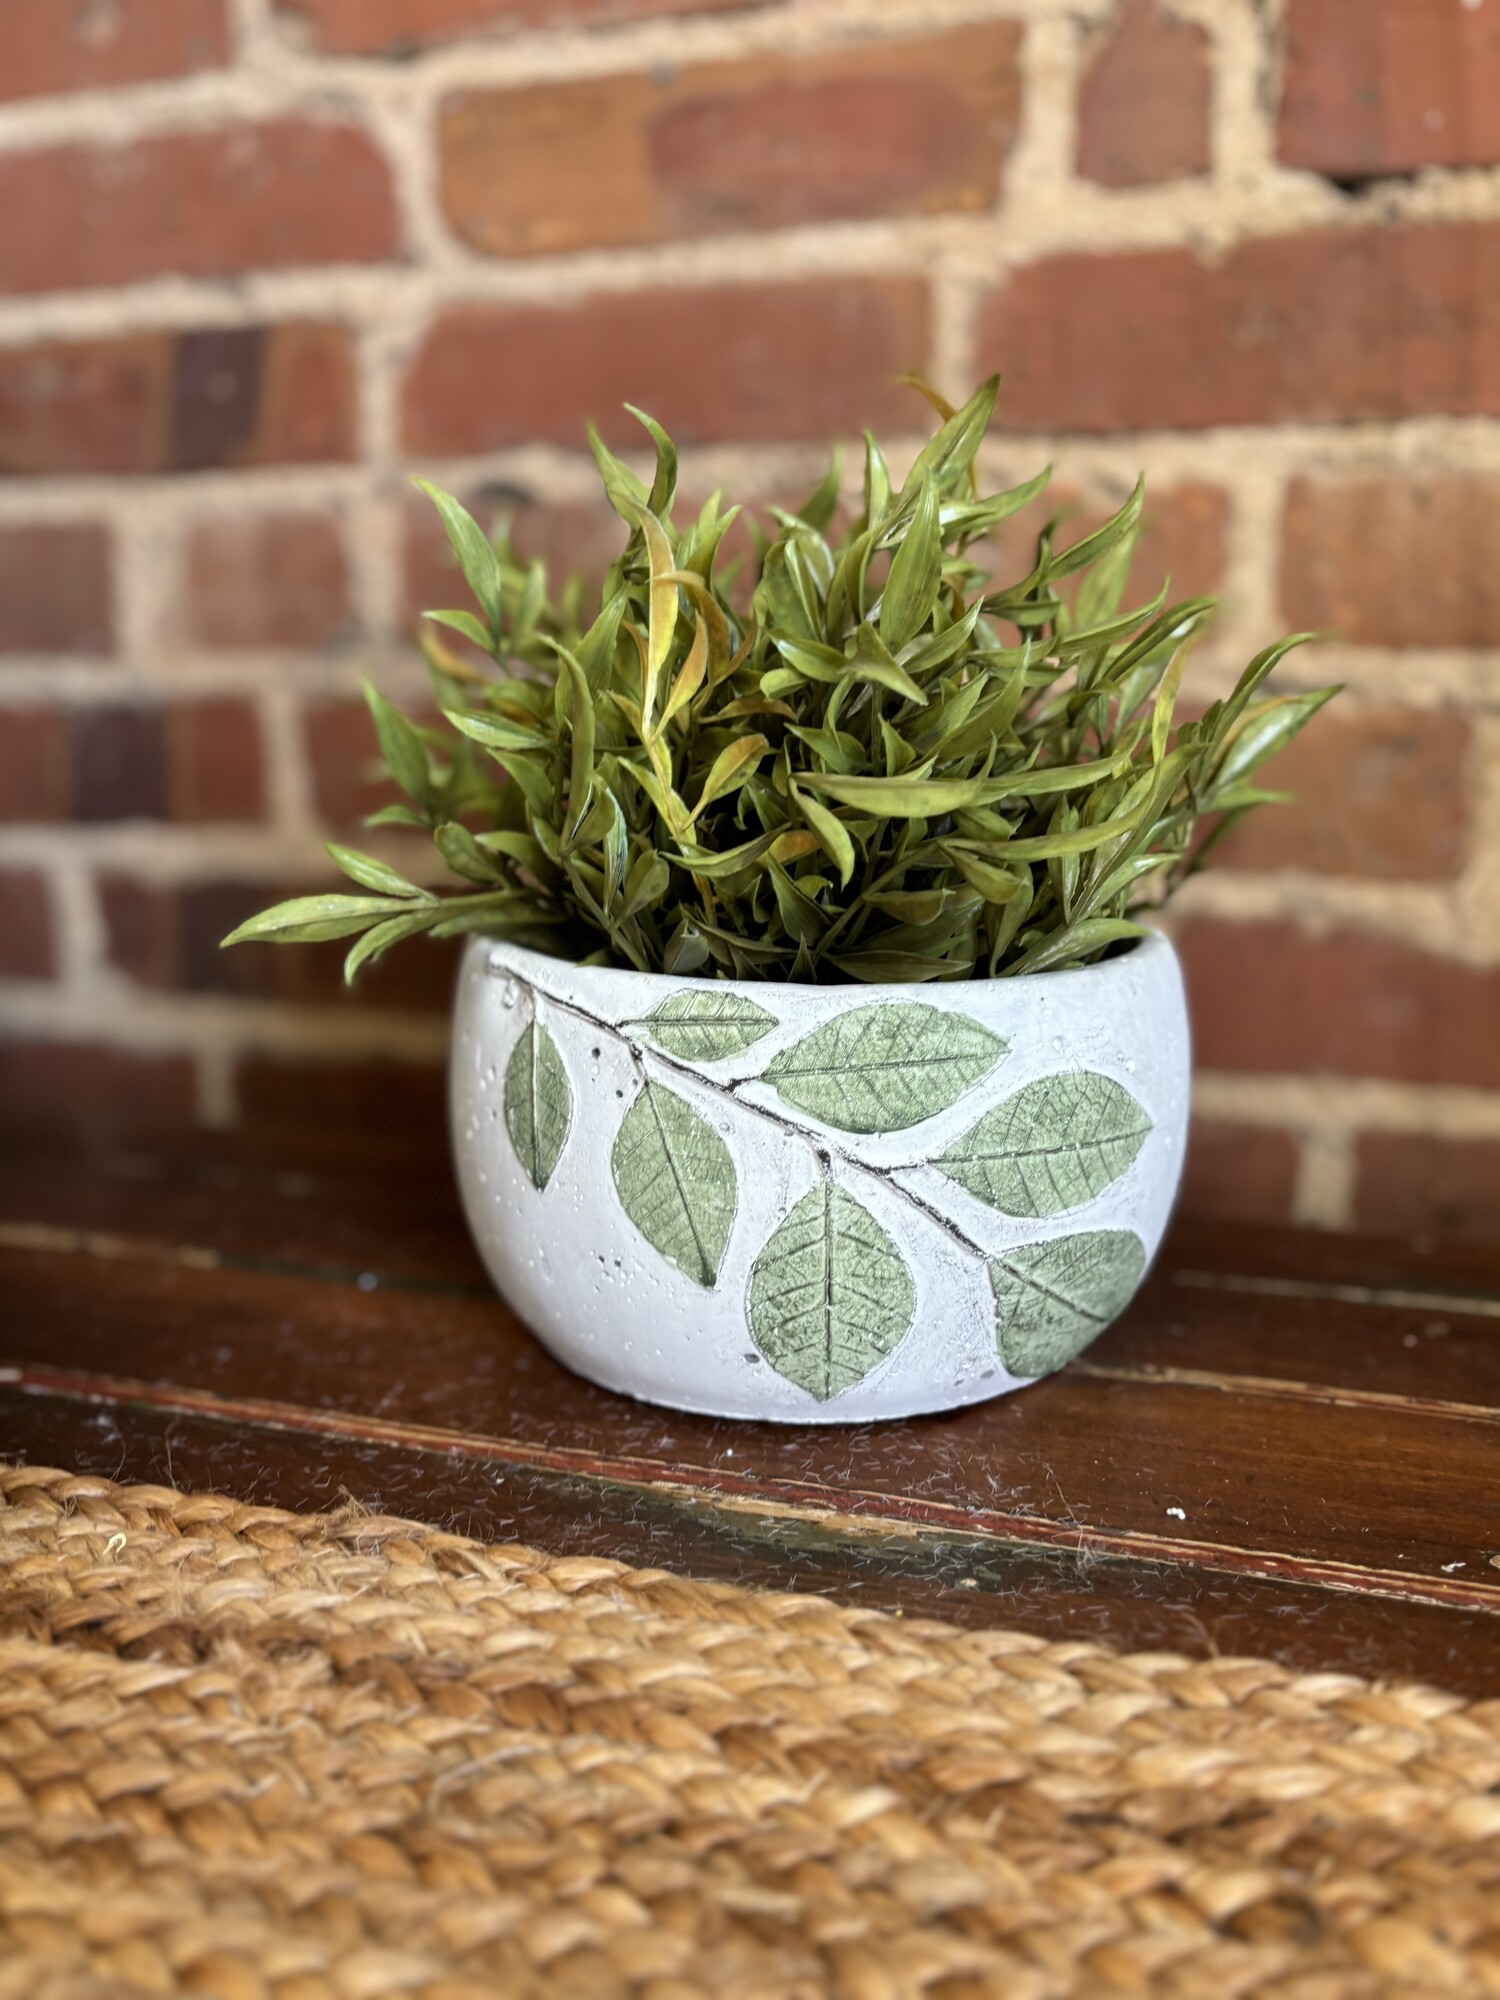 The cement planter with leaves is a pretty pot with raised painted leaves
Pot measures 4 inches high, 6 and a half inches around and is 3 and a half inches deep